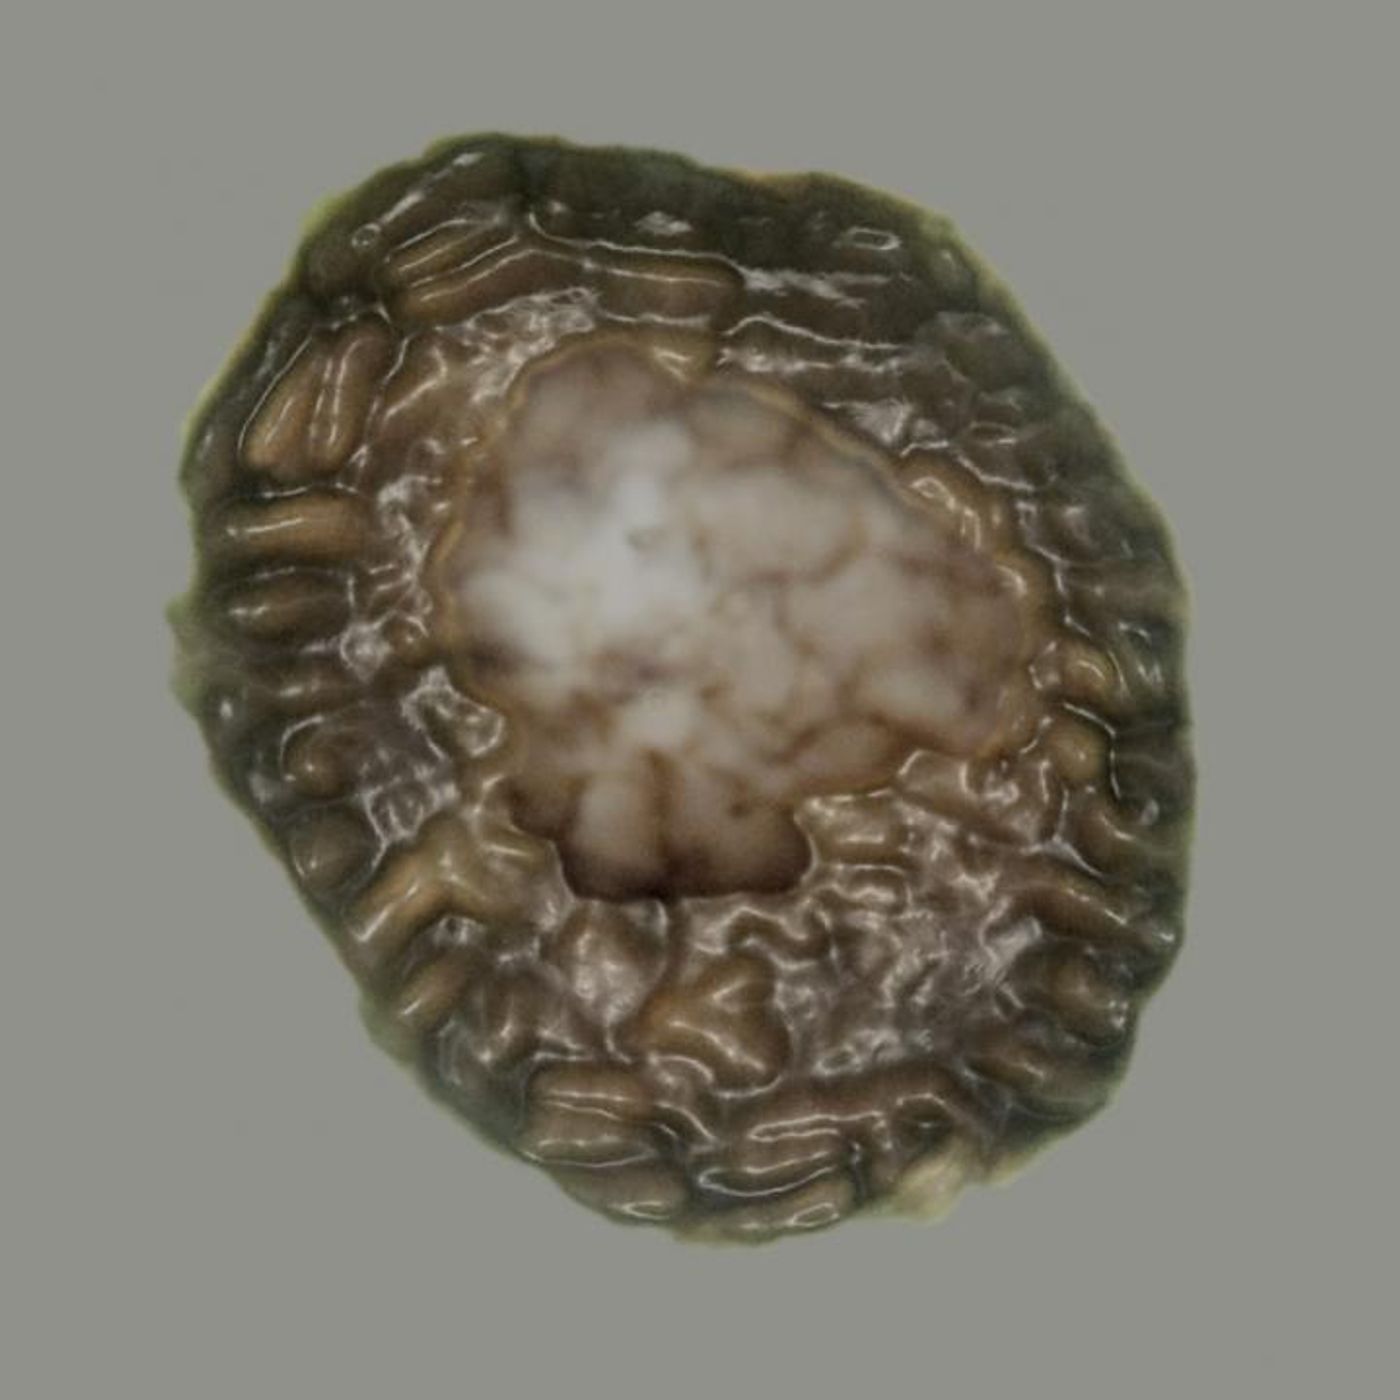 An image of Bicellum brasieri. It has an outer wall of sausage-shaped cells around an inner cell mass. The fossil suggests multicellular structures existed 400 million years earlier than we thought. / Credit: P.K. Strother